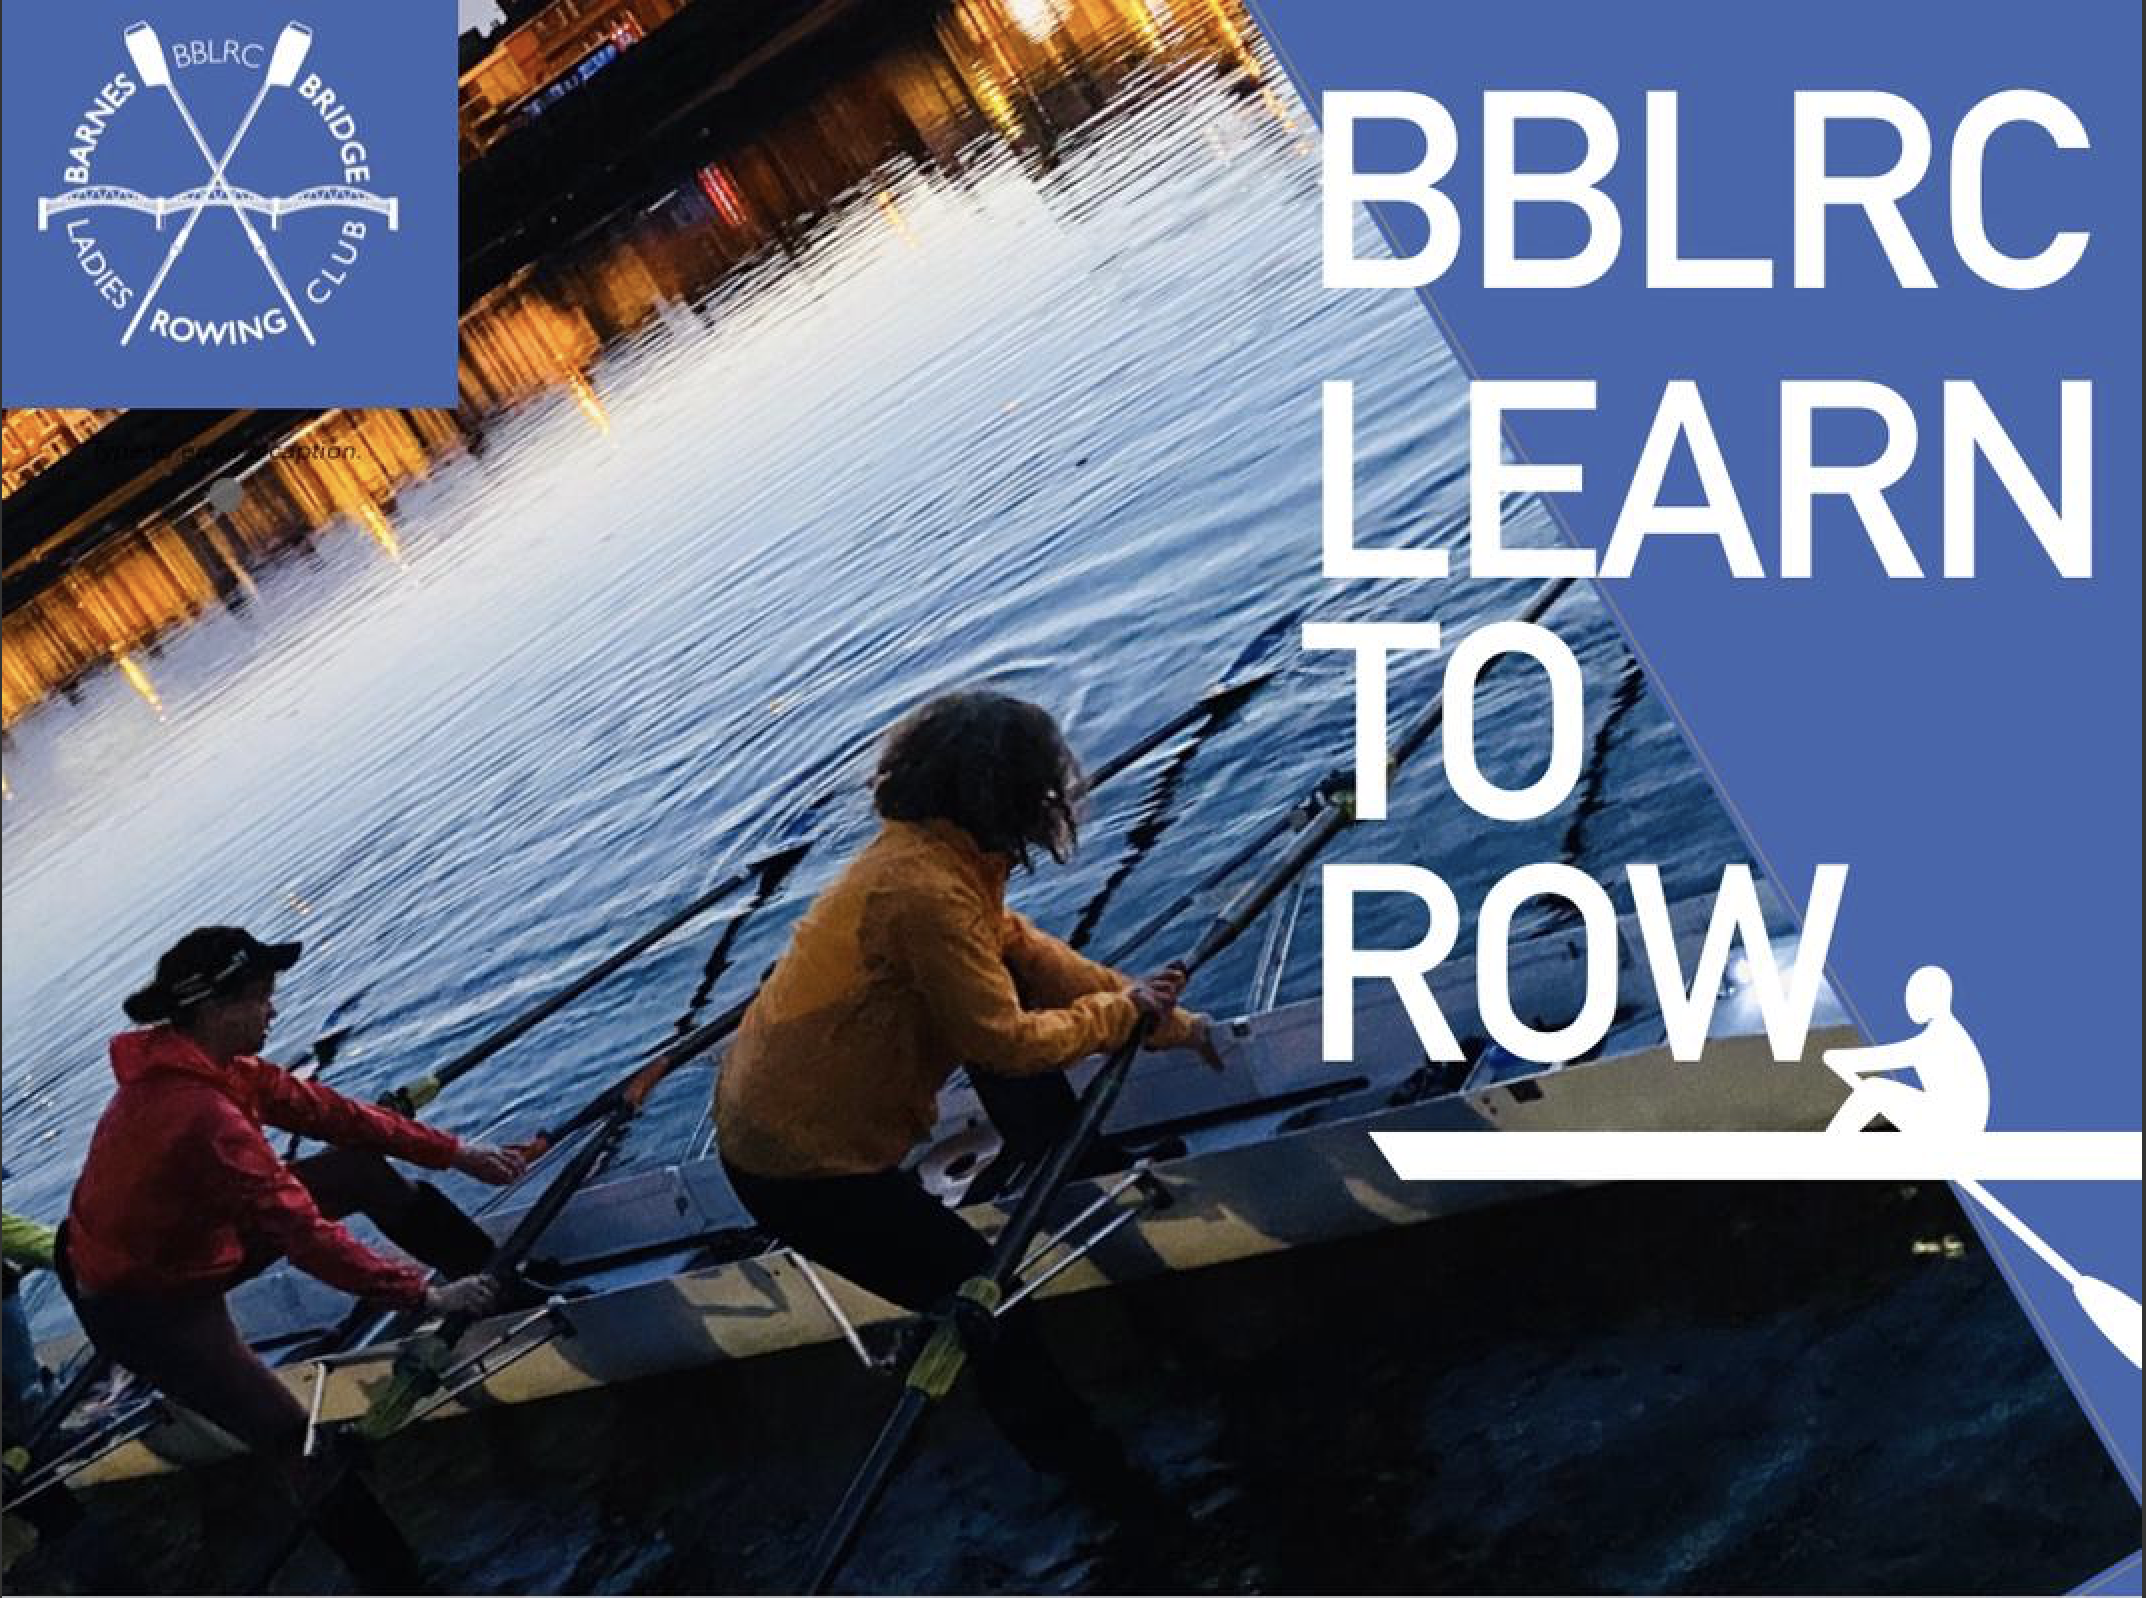 Learn to Row at BBLRC